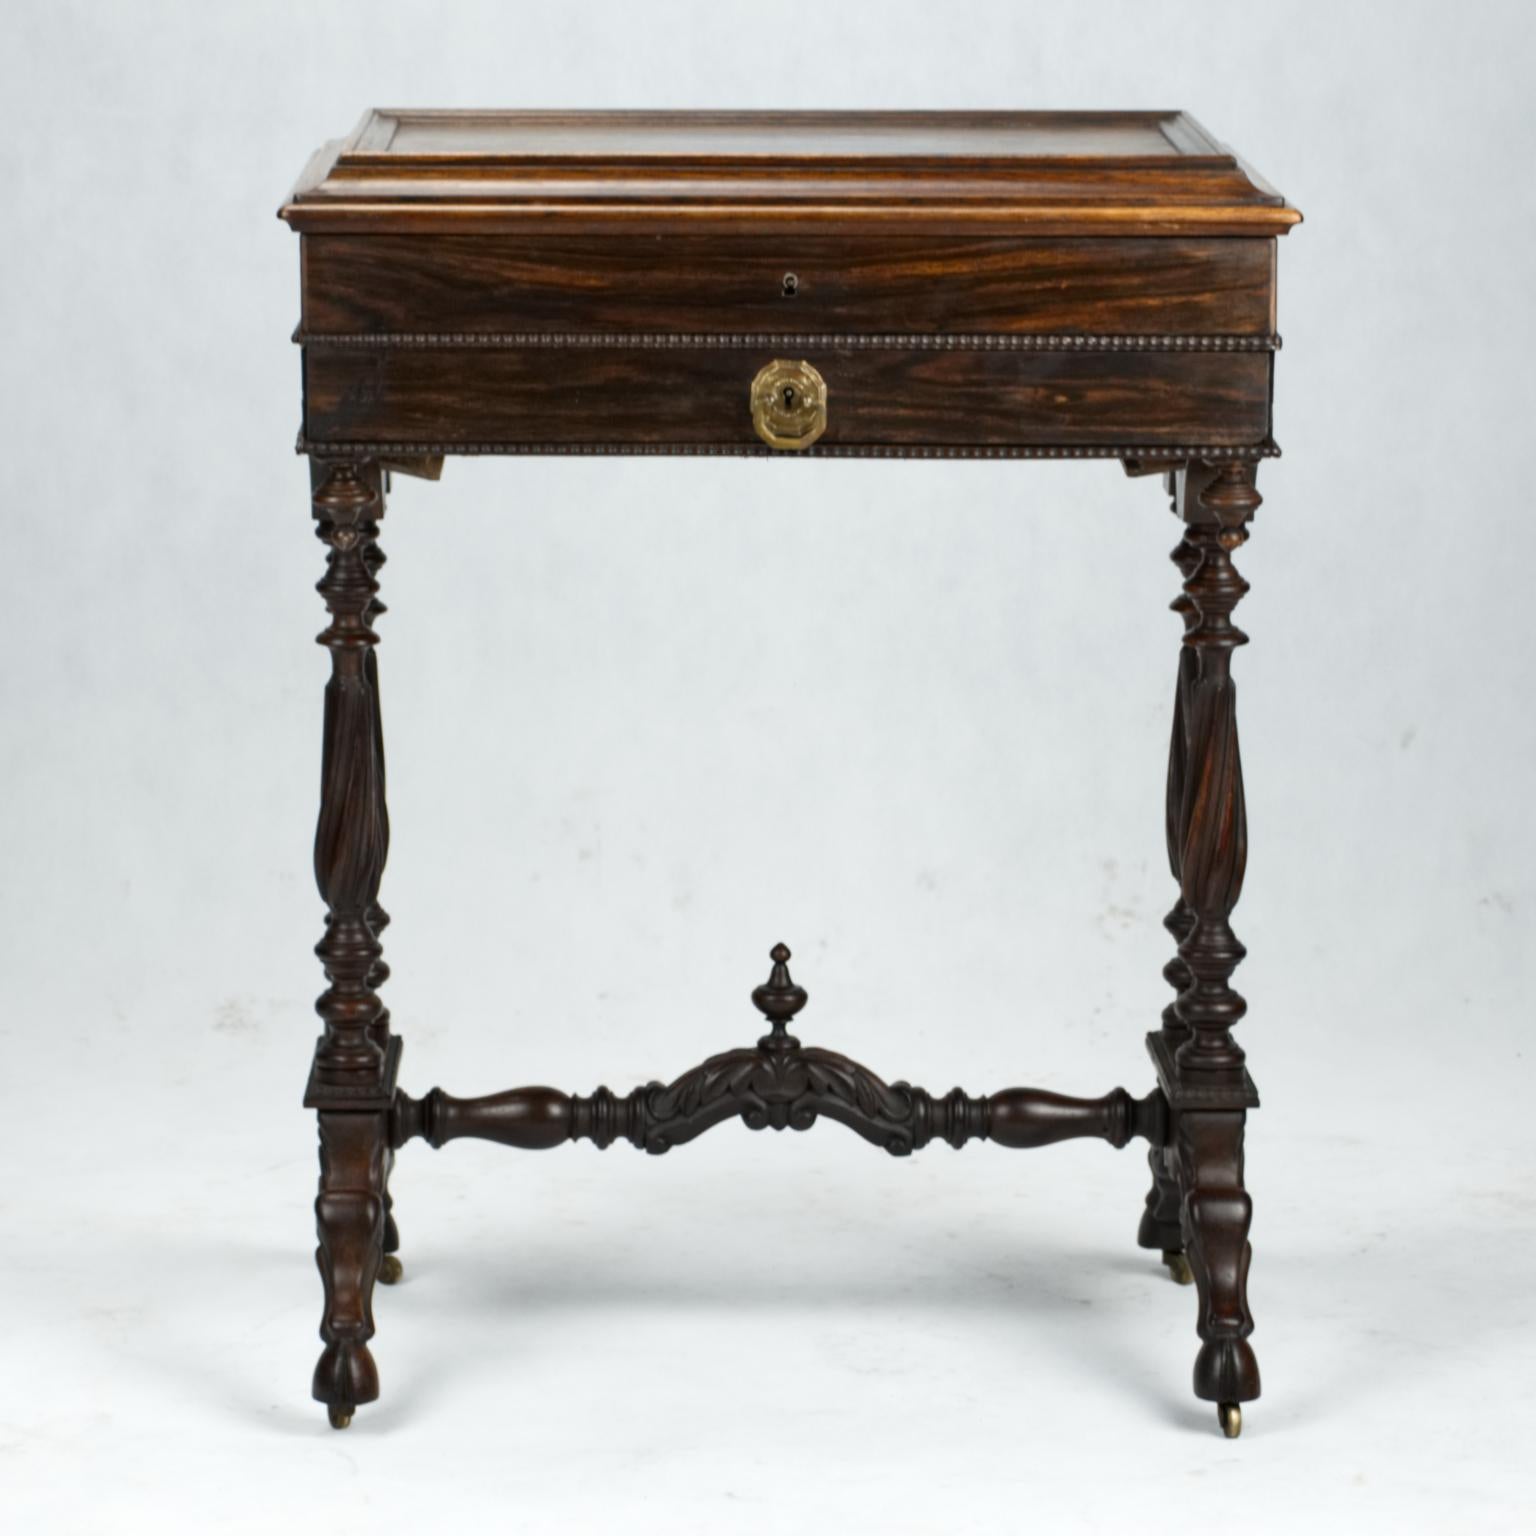 Hand-Carved Victorian Hand Carved Rosewood Vanity or Work Table, 19th Century